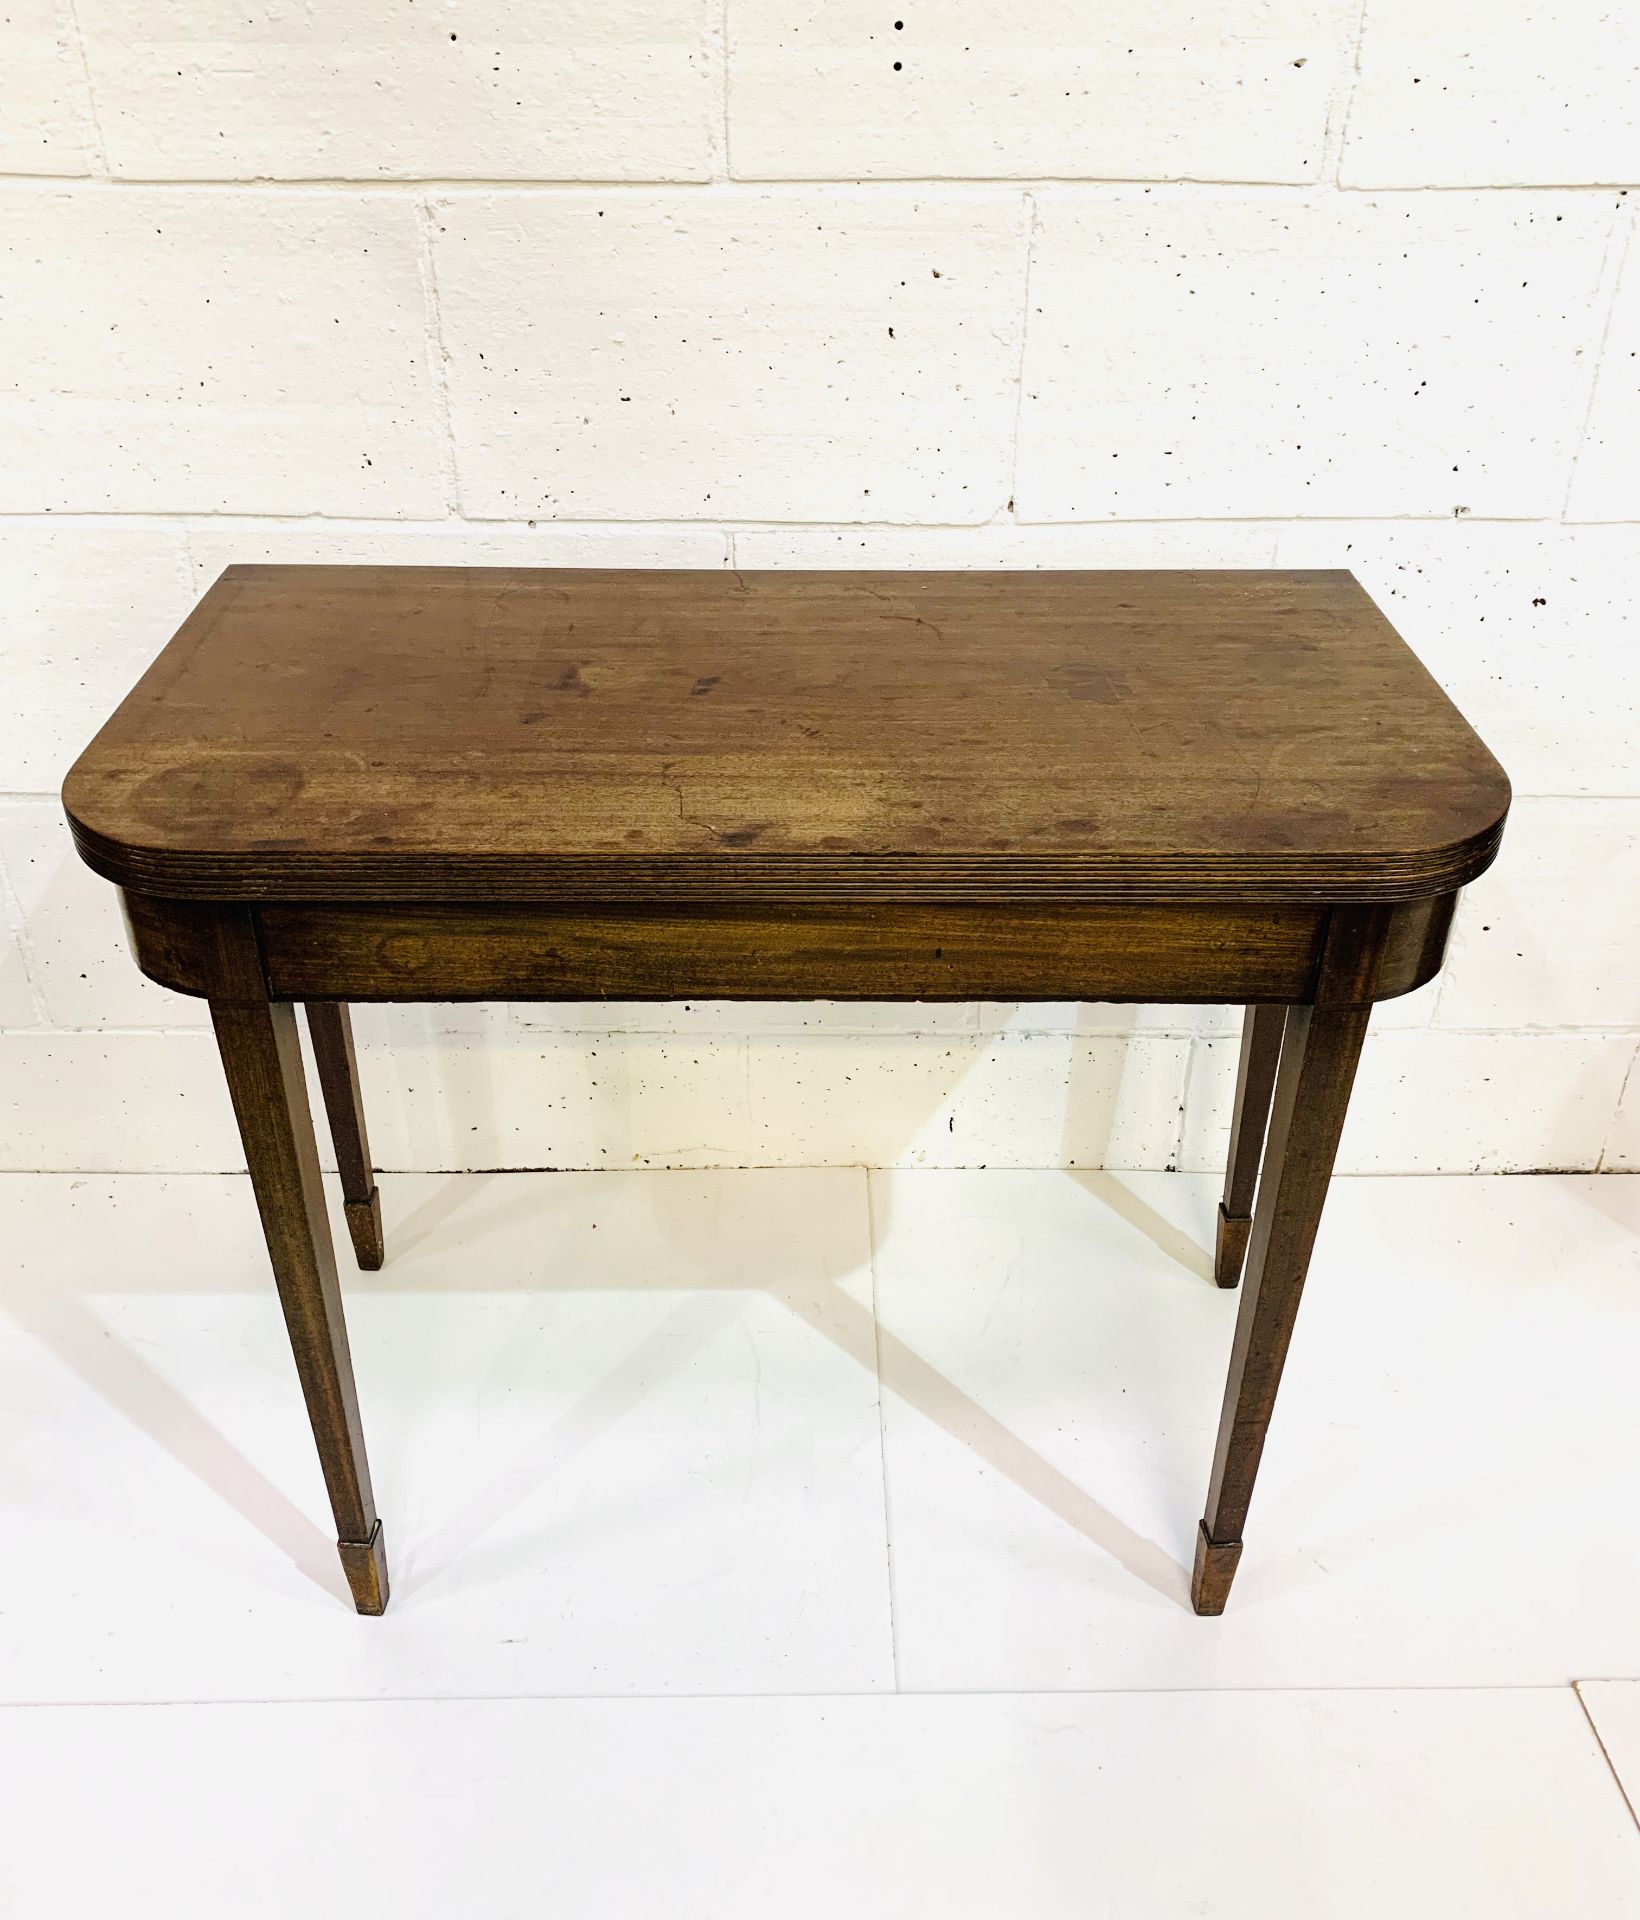 Mahogany gate leg side table with fold over top on tapered legs.